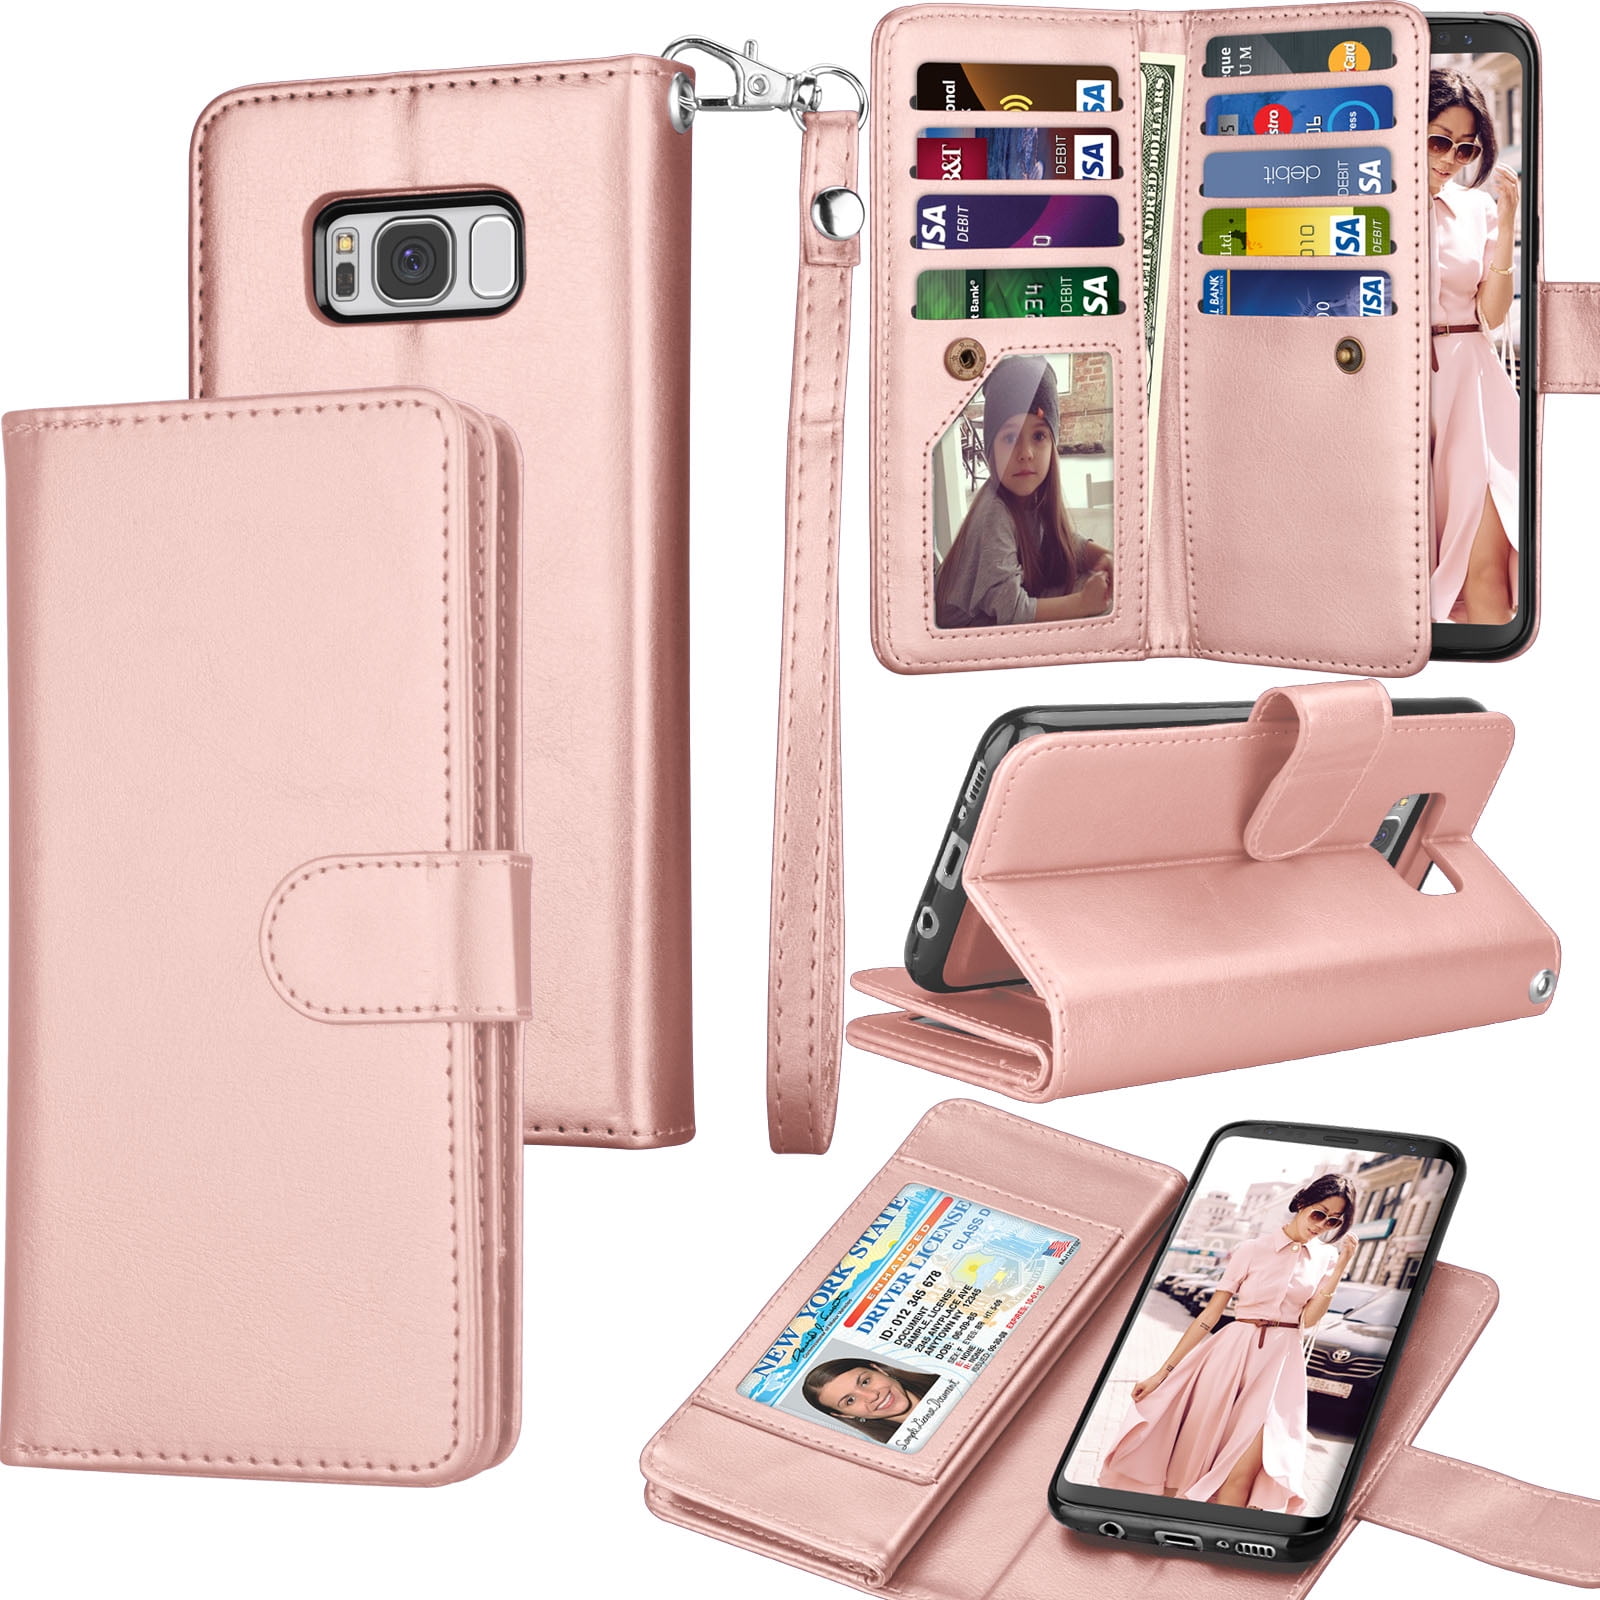 Flip Case for Samsung Galaxy S8 Plus Leather Cover Extra-Protective Business Cell Phone case Card Holders Kickstand with Free Waterproof-Bag 